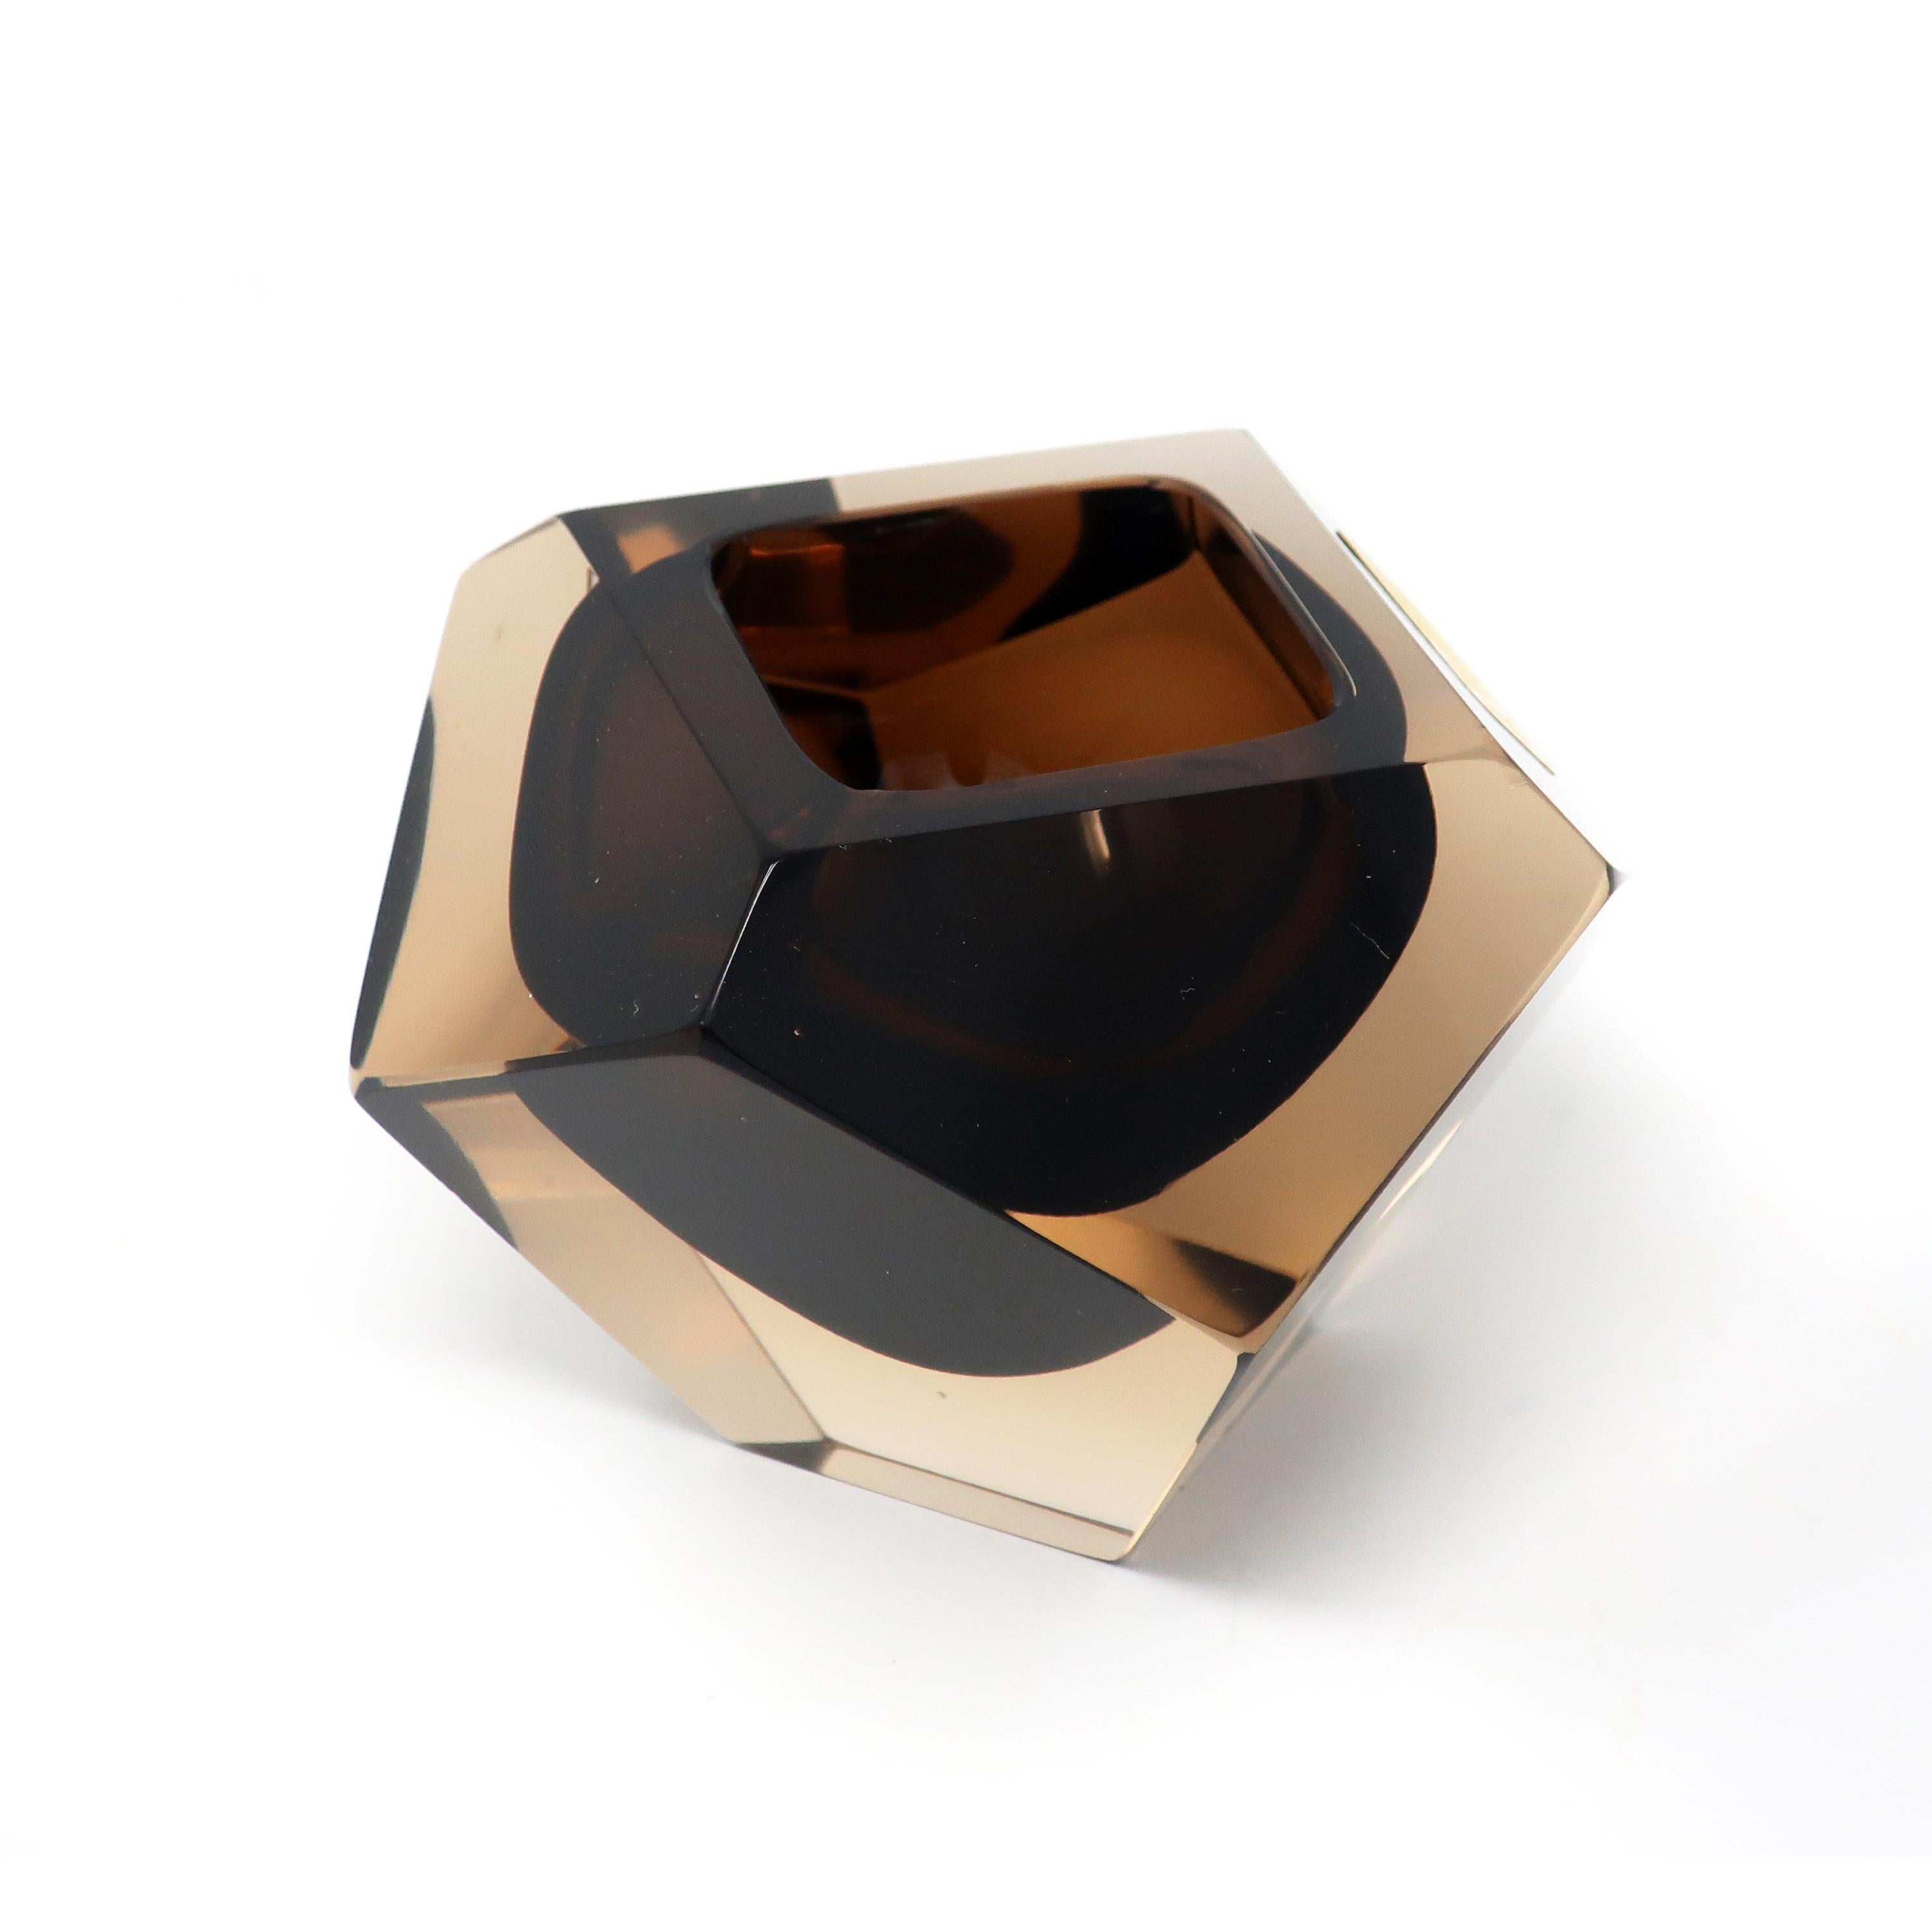 A gorgeous brown and clear glass ashtray by V. Nason & C. The dark brown glass is encased in an angular block of light brown glass utilizing the renowned Italian Sommerso technique in the style of Flavio Poli for Seguso Vetri d'Arte and Alessandro